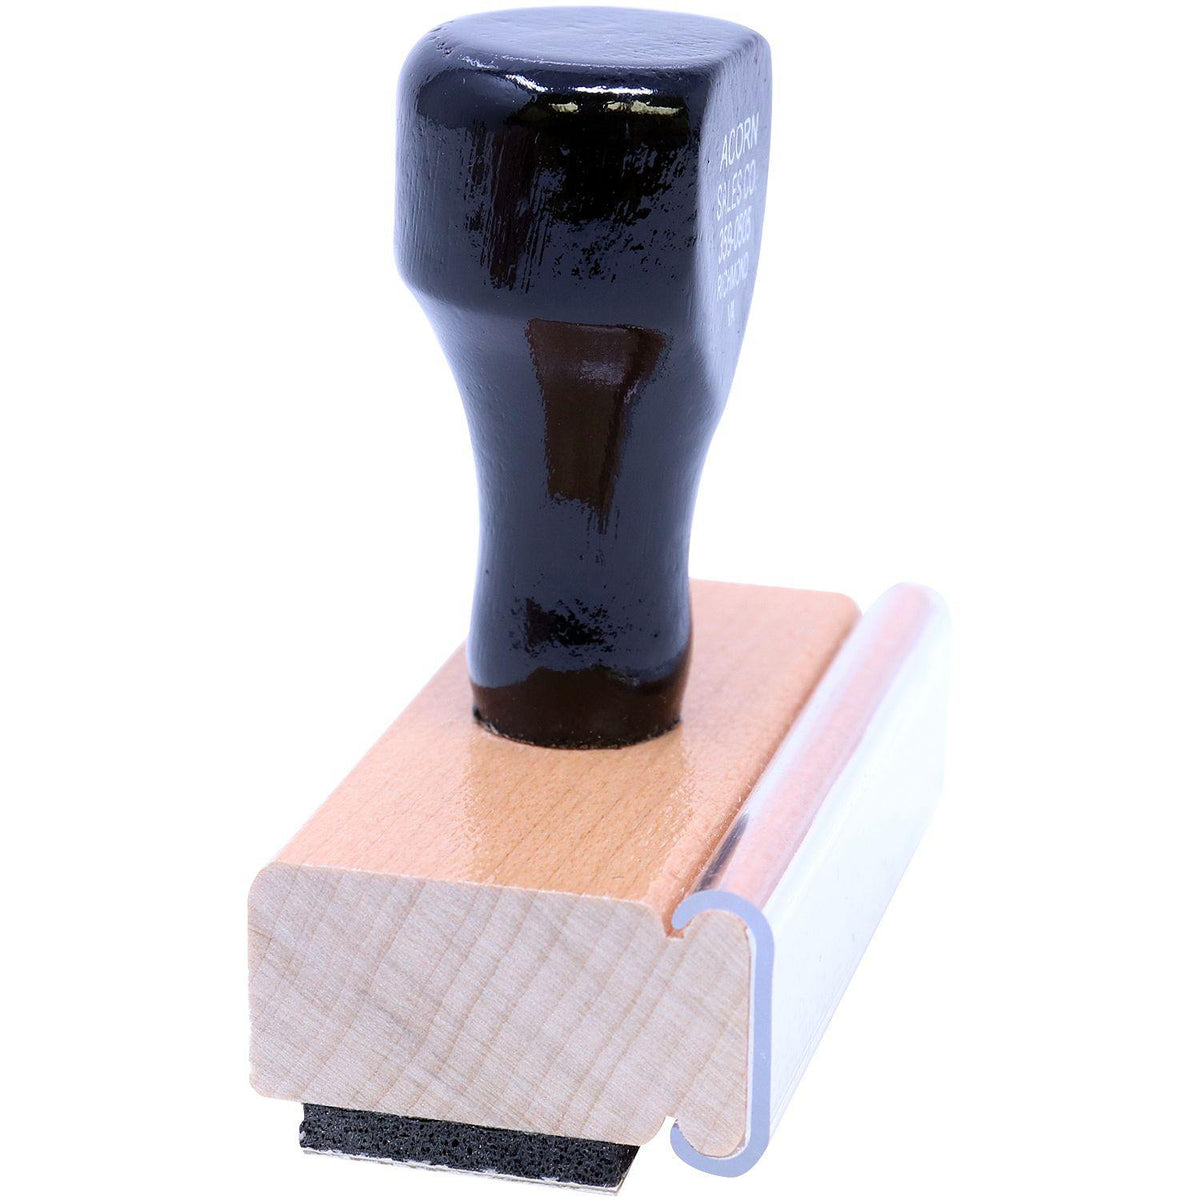 Side View of Advance Directive Rubber Stamp at an Angle